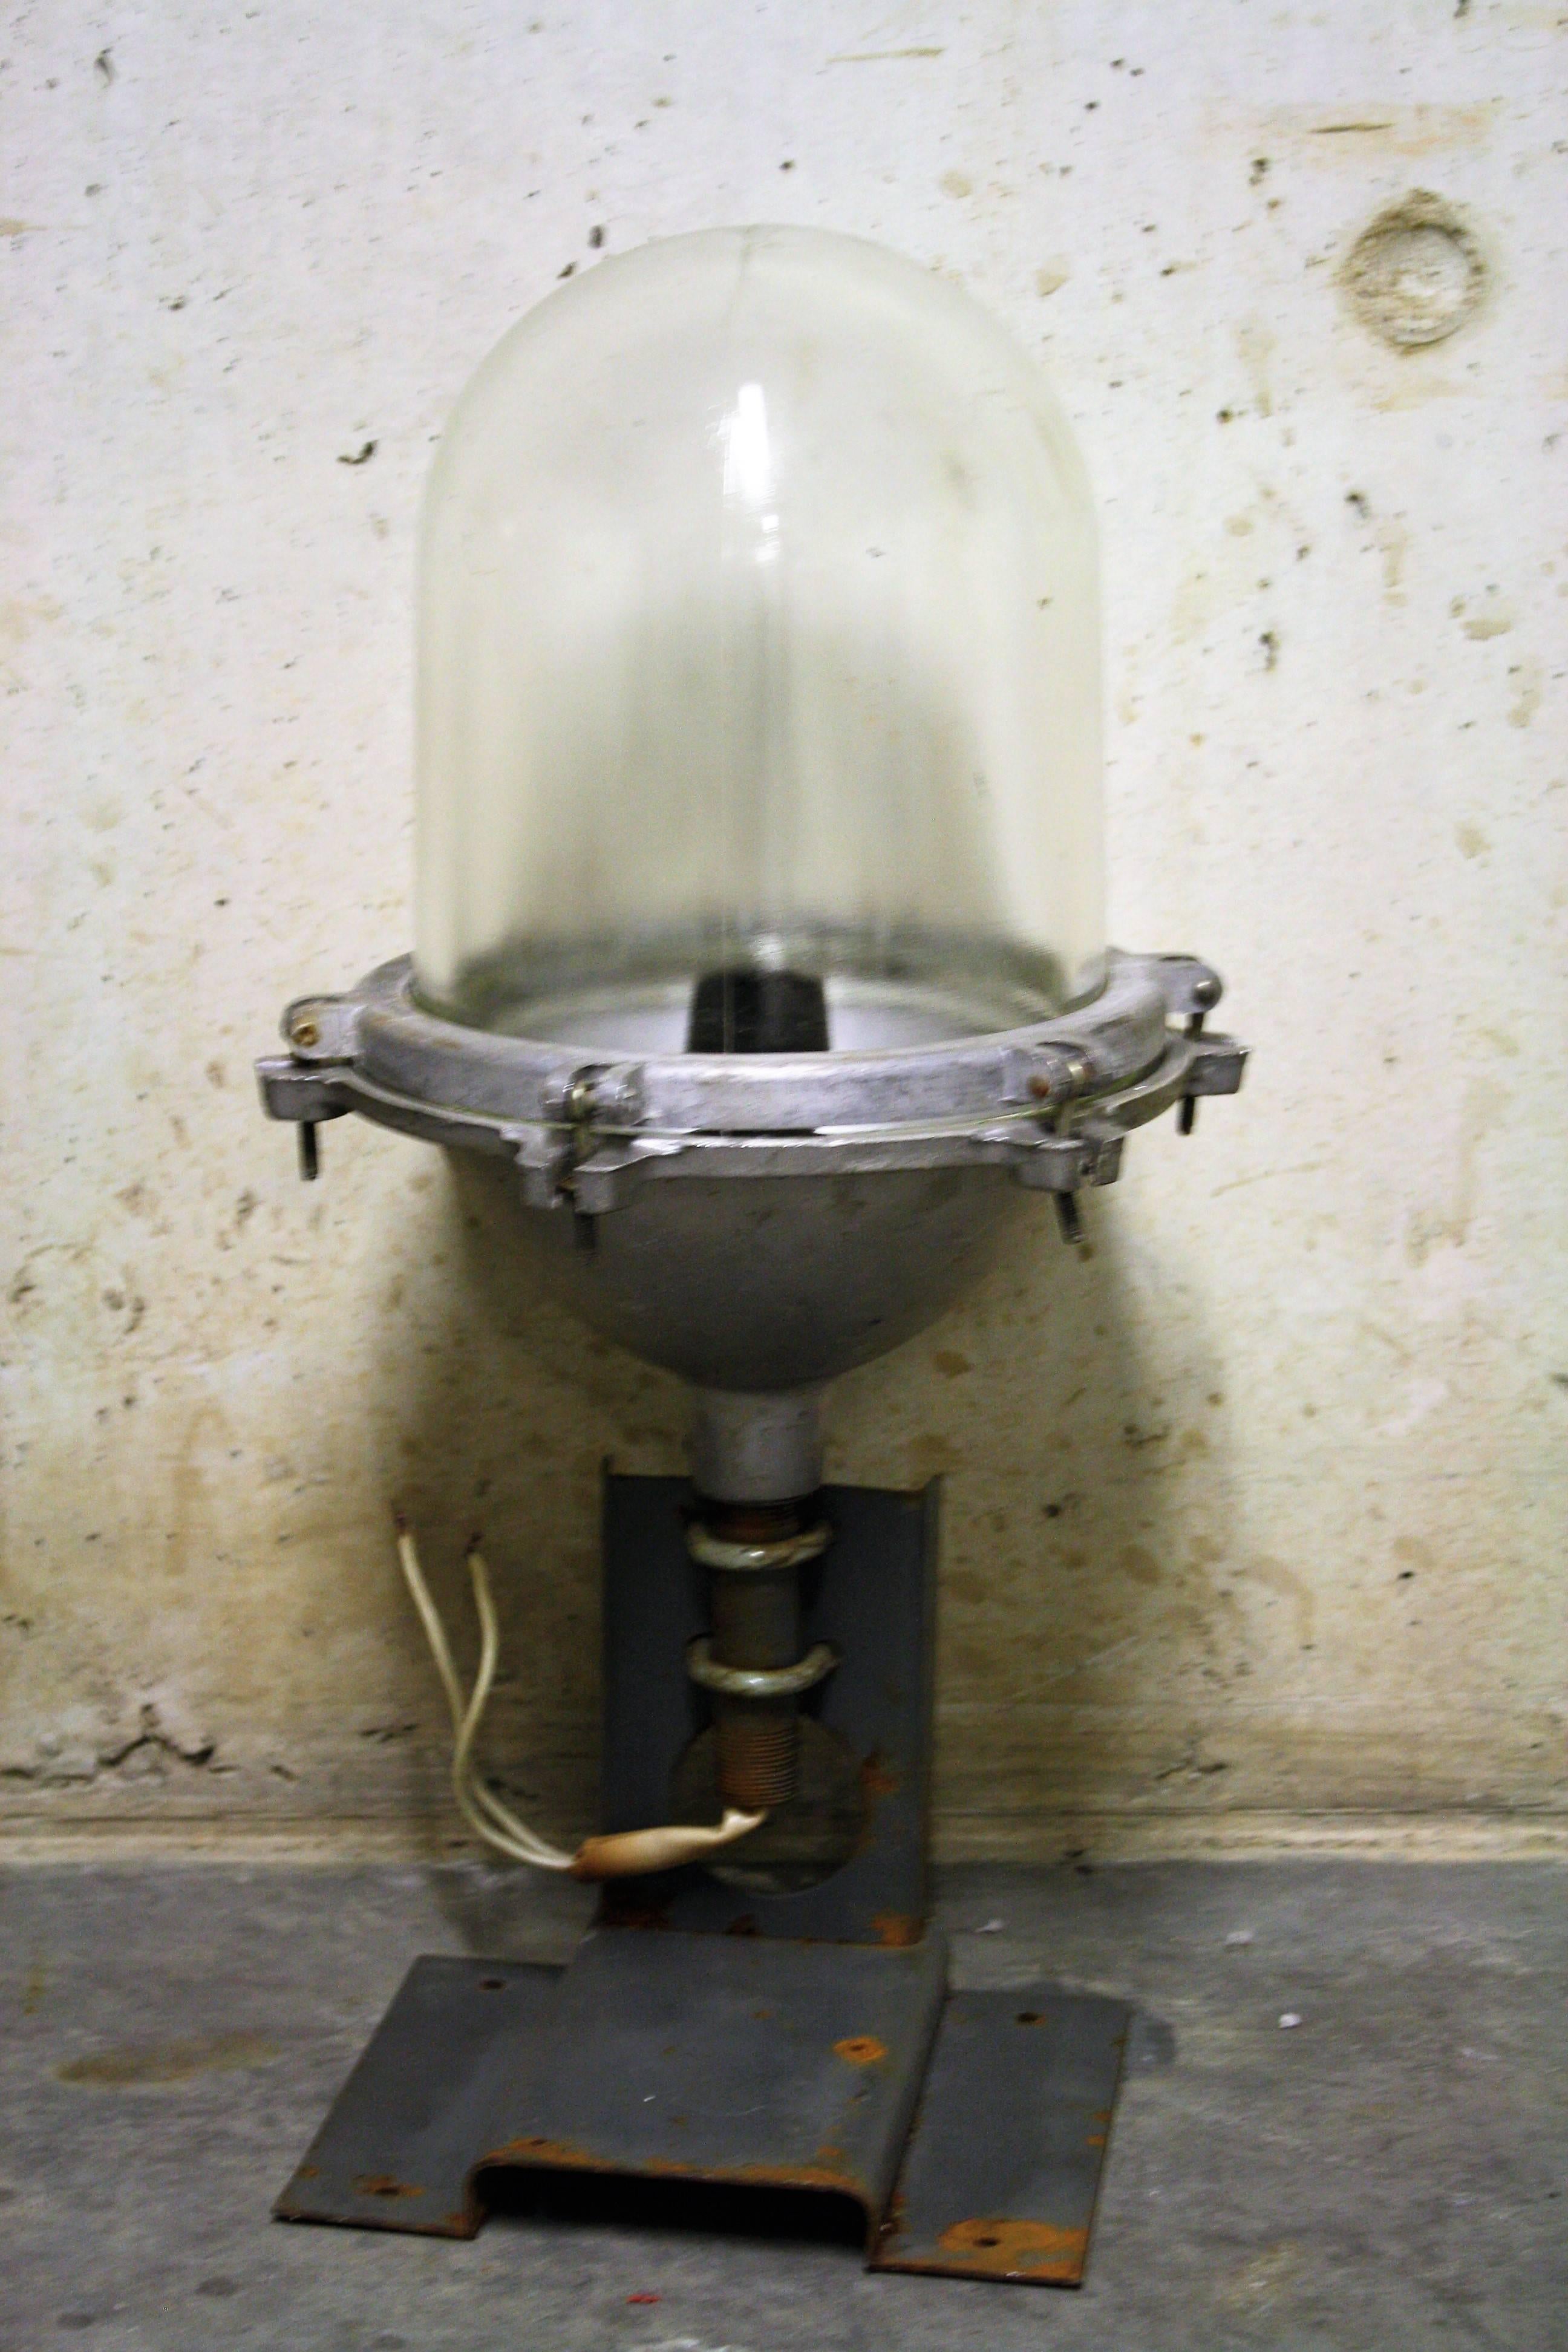 Pair of cast iron explosion proof Industrial bully lamps.

These lamps where commonly used in chemical factories and are made of very thick glass.

These USSR examples have a very 'heavy duty' Industrial look.

The lamps come with their